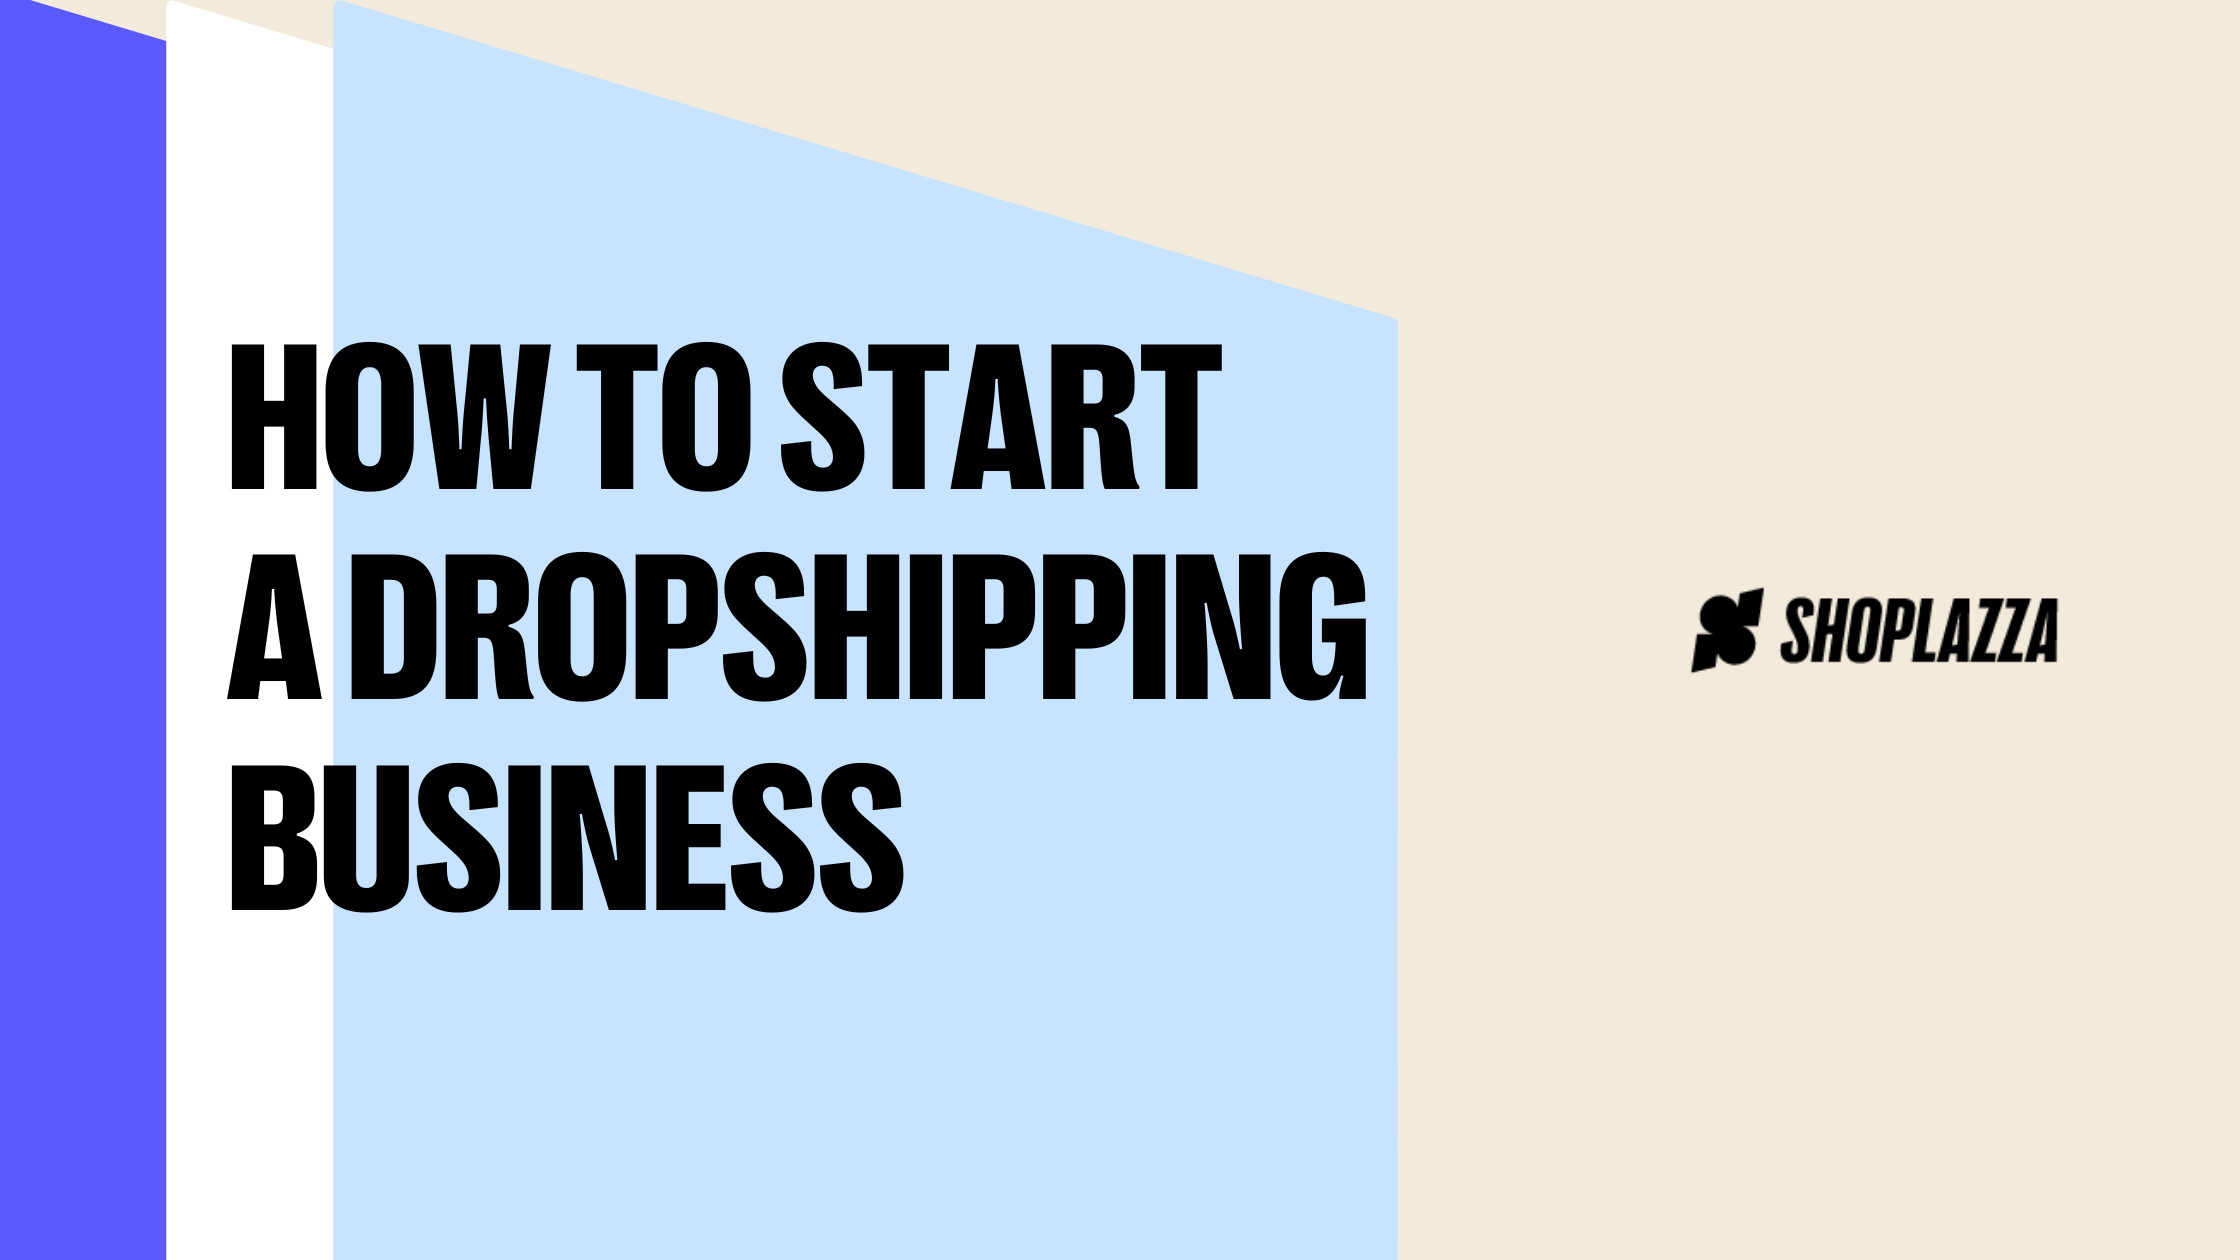 Cover image shows the title of the article, how to start a dropshipping business, in Shoplazza's brand colors and with the Shoplazza logo next to it, on the right.